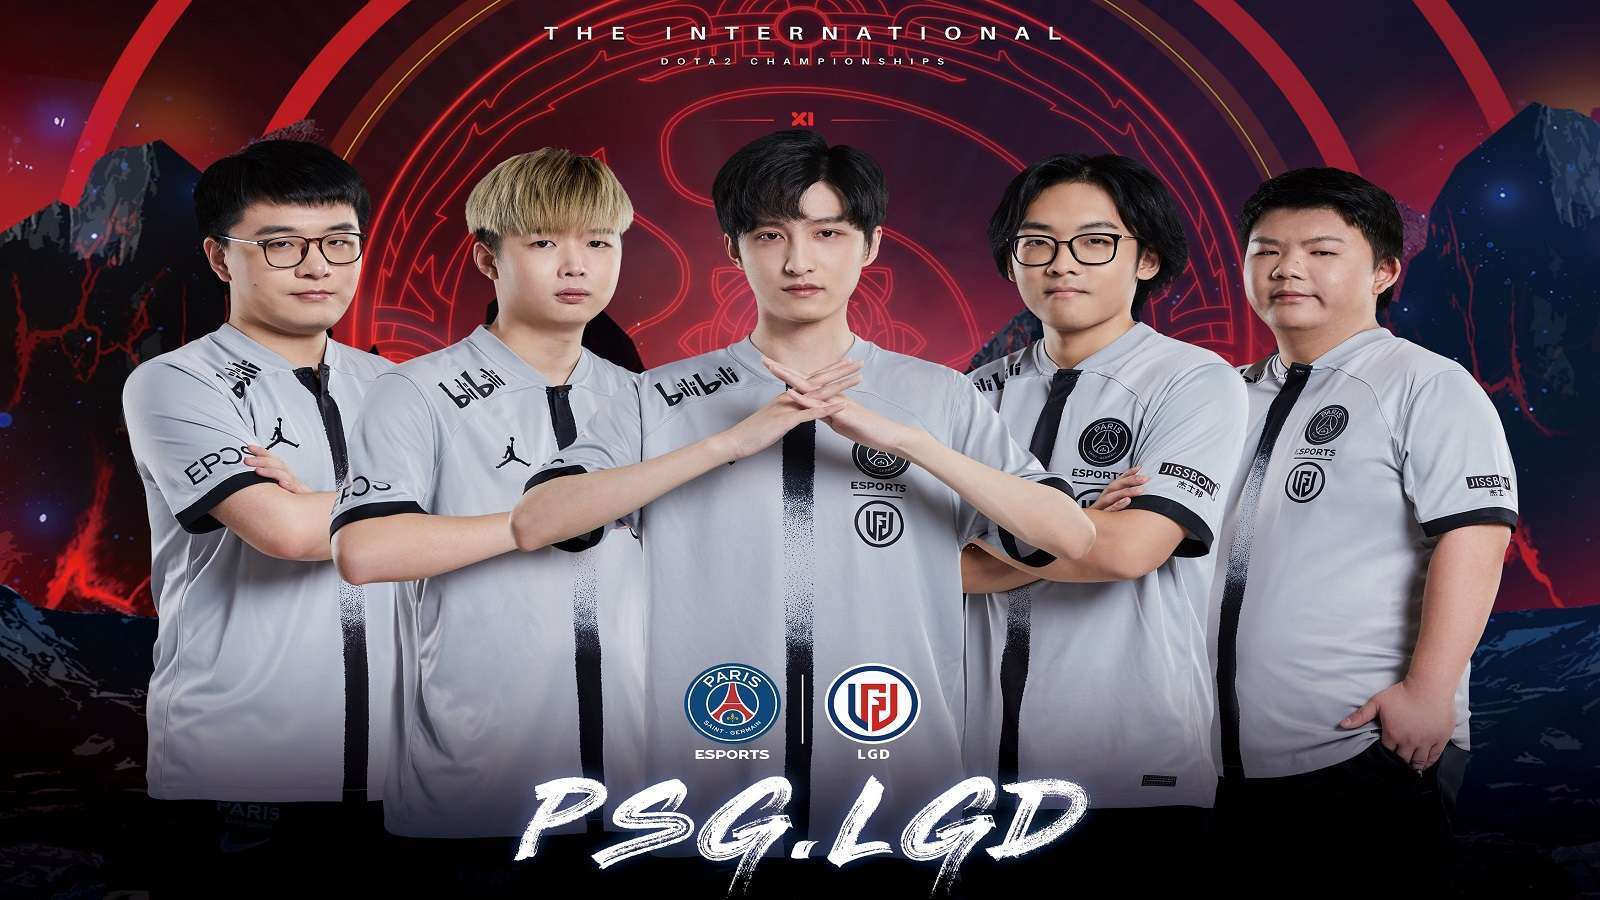 cover art featuring psg.lgd's dota 2 roster